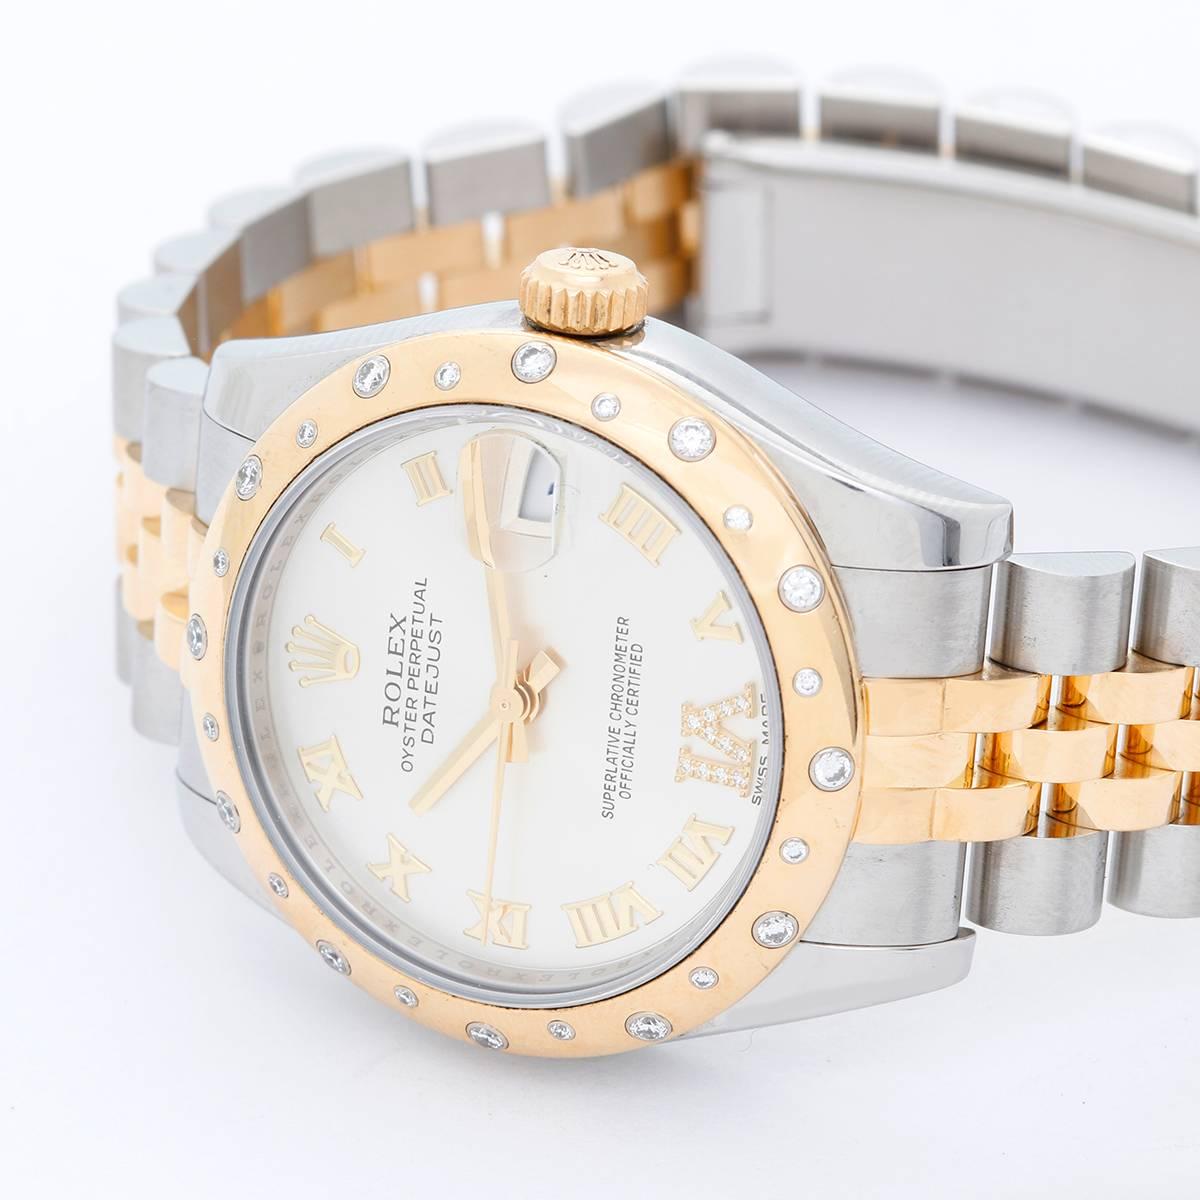 Rolex Datejust Midsize 31mm Steel & Gold 24 Diamond Dome Bezel Watch 178343 -  Automatic winding, 31 jewels, sapphire crystal. Stainless steel case with scattered 24 diamond 18k yellow gold dome bezel (31mm diameter). Silver Pave dial with Roman